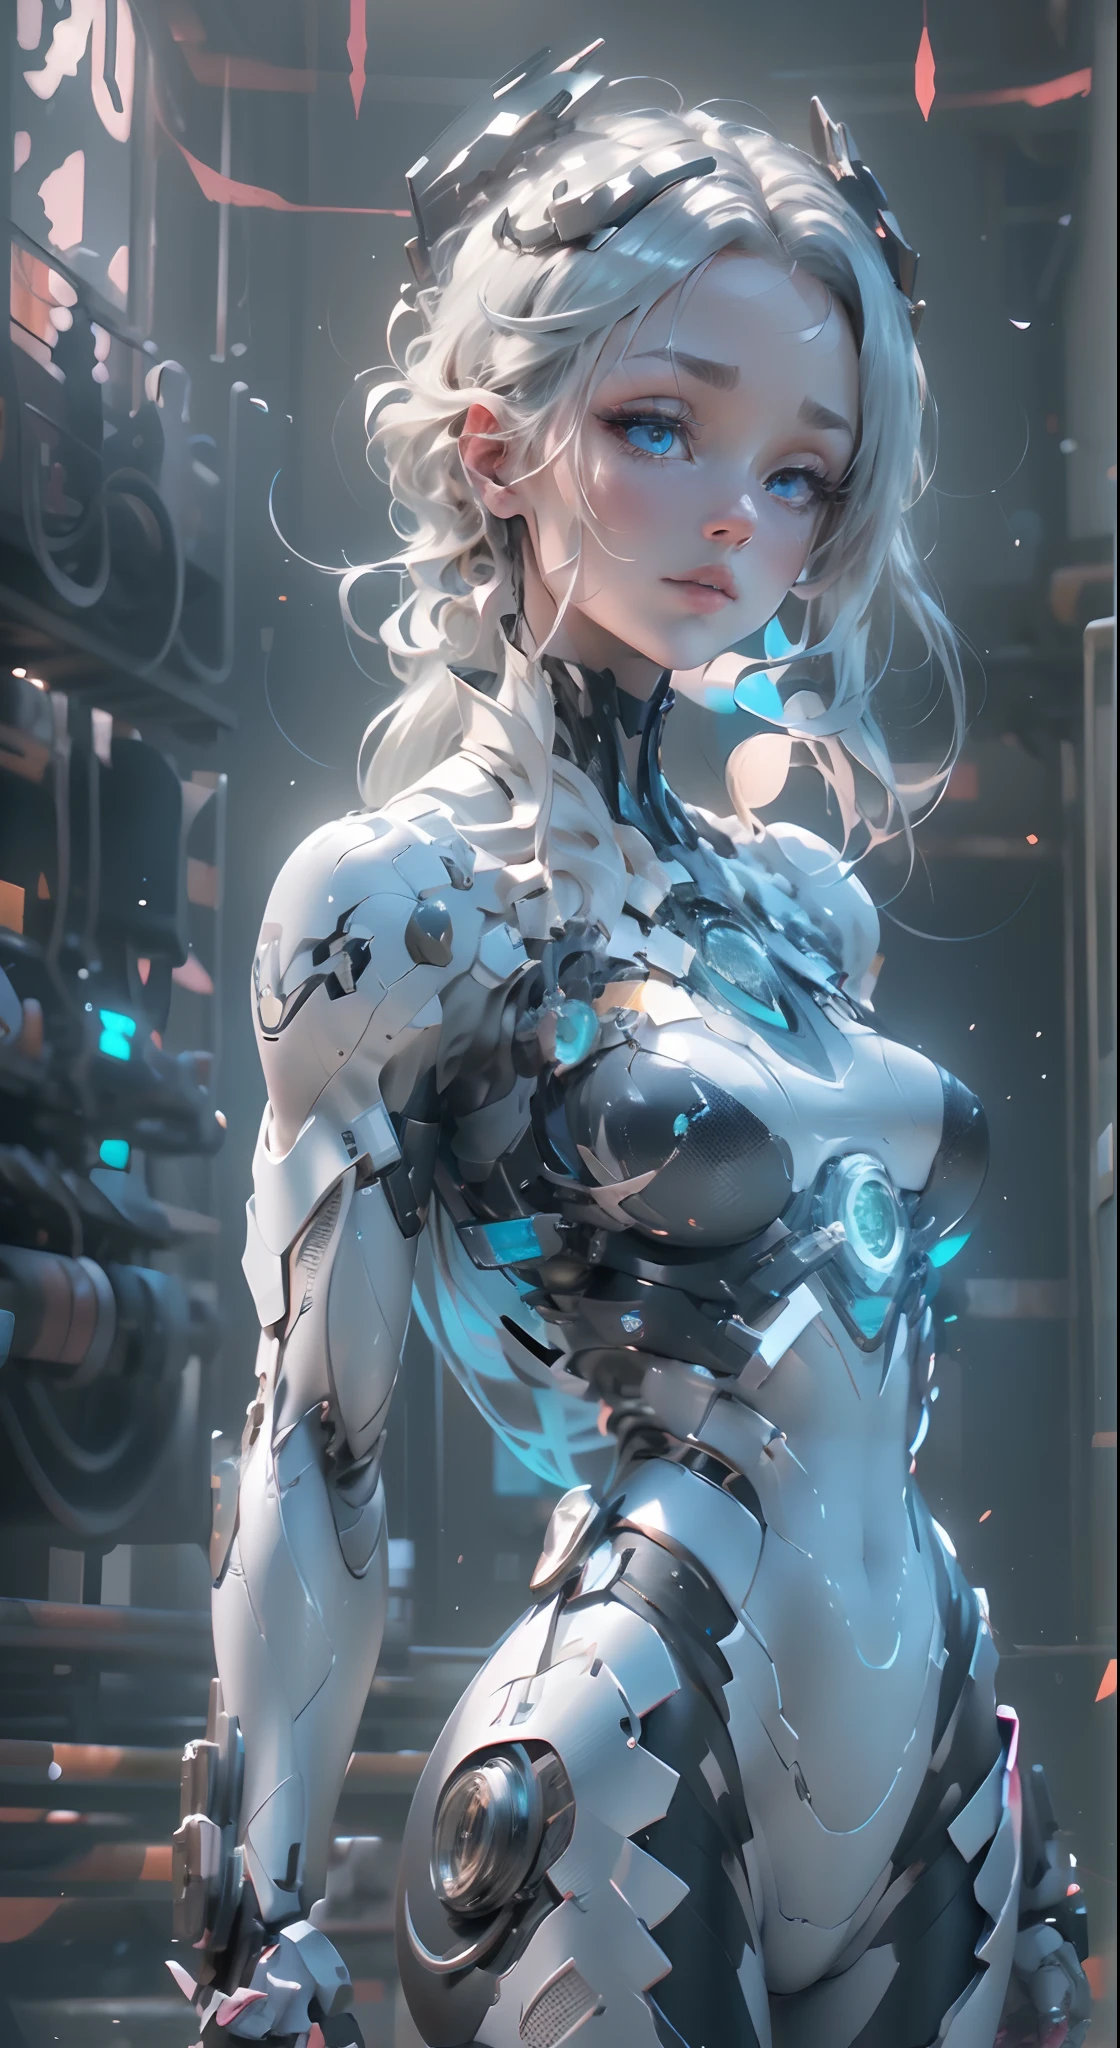 (((Young white woman))), ((Best quality)), ((Masterpiece)), (detail: 1.4), 。.。.。.。.3D, A beautiful cyberpunk woman with Simon Beasley style miniature pliers, Genesis evangelion neon style clothing, 2-piece clothing, Long silver hair, Arm this, cybernetic hands, Pastel, Centered, Scale to fit the dimensions, NFFSW (HighDynamicRange),Ray tracing,NVIDIA RTX,Hyper-Resolution,Unreal 5,Subsurface dispersion, PBR Texture, Post-processing, Anisotropy Filtering, depth of fields, Maximum clarity and sharpness, Many-Layer Textures, Albedo and specular maps, Surface coloring, Accurately simulate light and material interactions, Perfect proportions, rendering by octane, Two-tone lighting, Wide aperture, Low ISO, White balance, the rule of thirds, 8K raw data, crysisnanosuit,Loraeyes,nijistyle,Pantyhose,Blue eyes